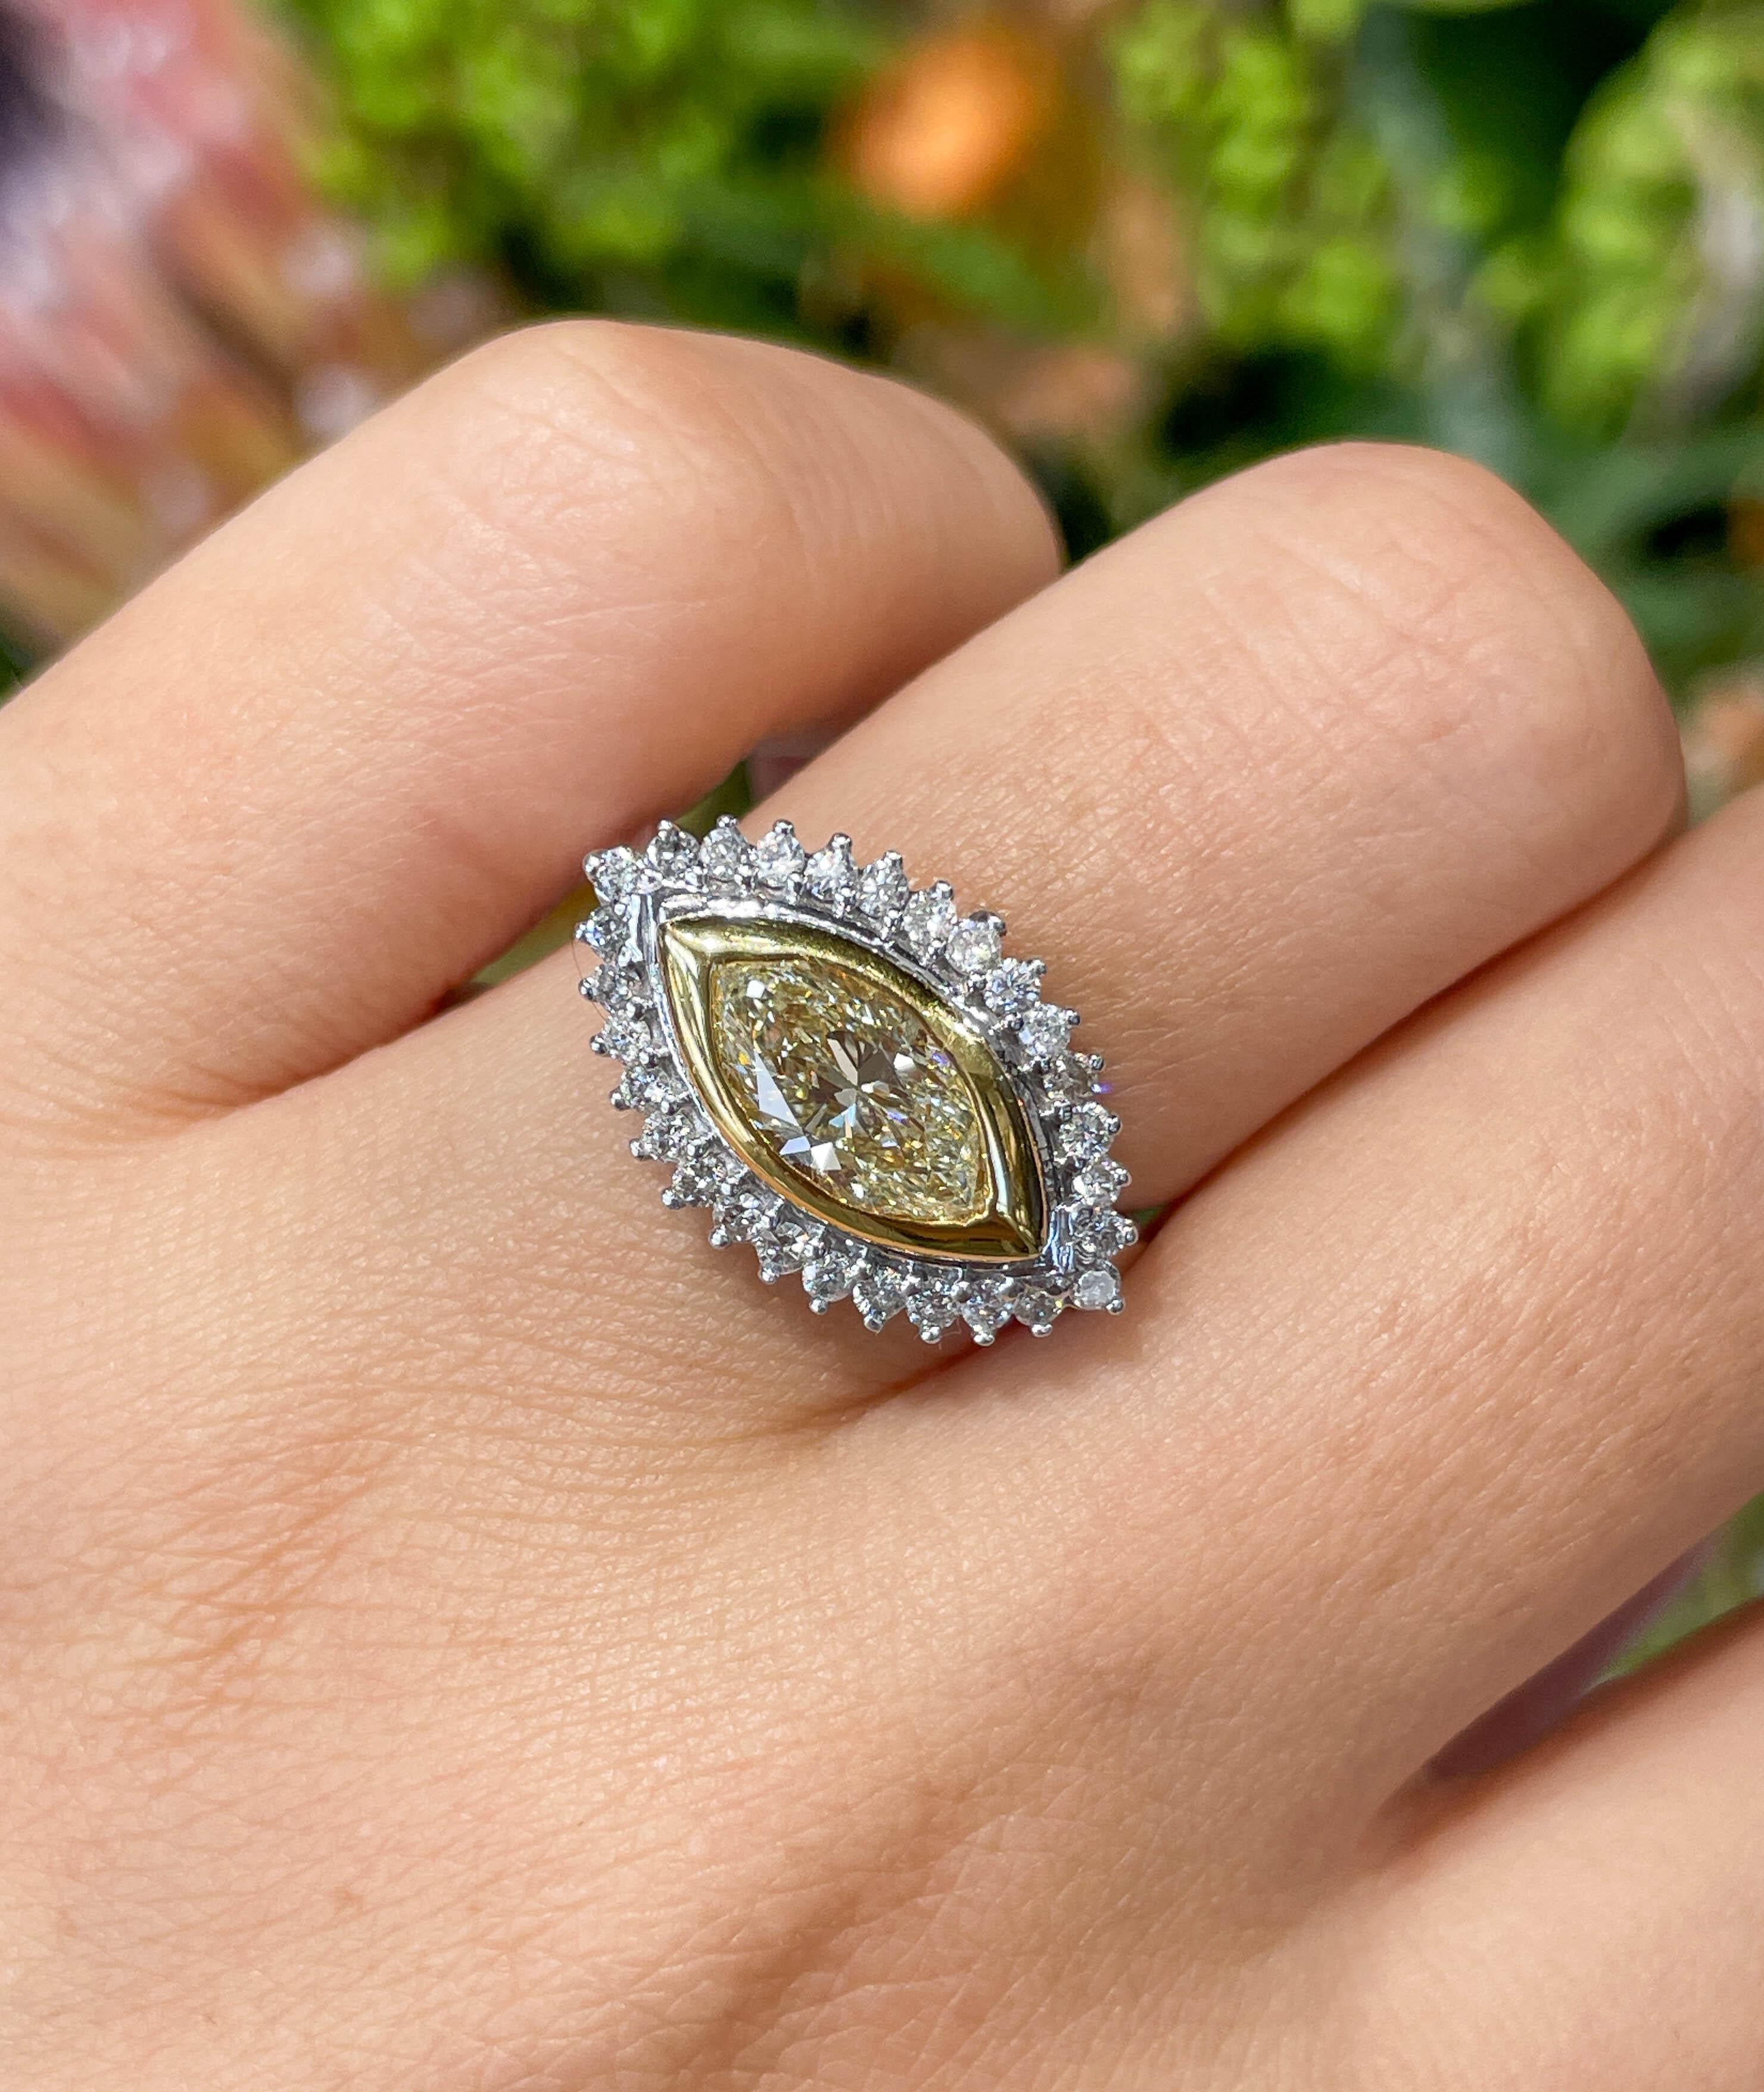 Jay Feder Diamond ring in 14k Two-tone gold with 1.27ct Yellow Marquise diamond in the center, set East-West way into a diamond halo; estimated total weight of white diamonds is 0.56ctw; G-H color and VS clarity overall.

The top’s measurements are